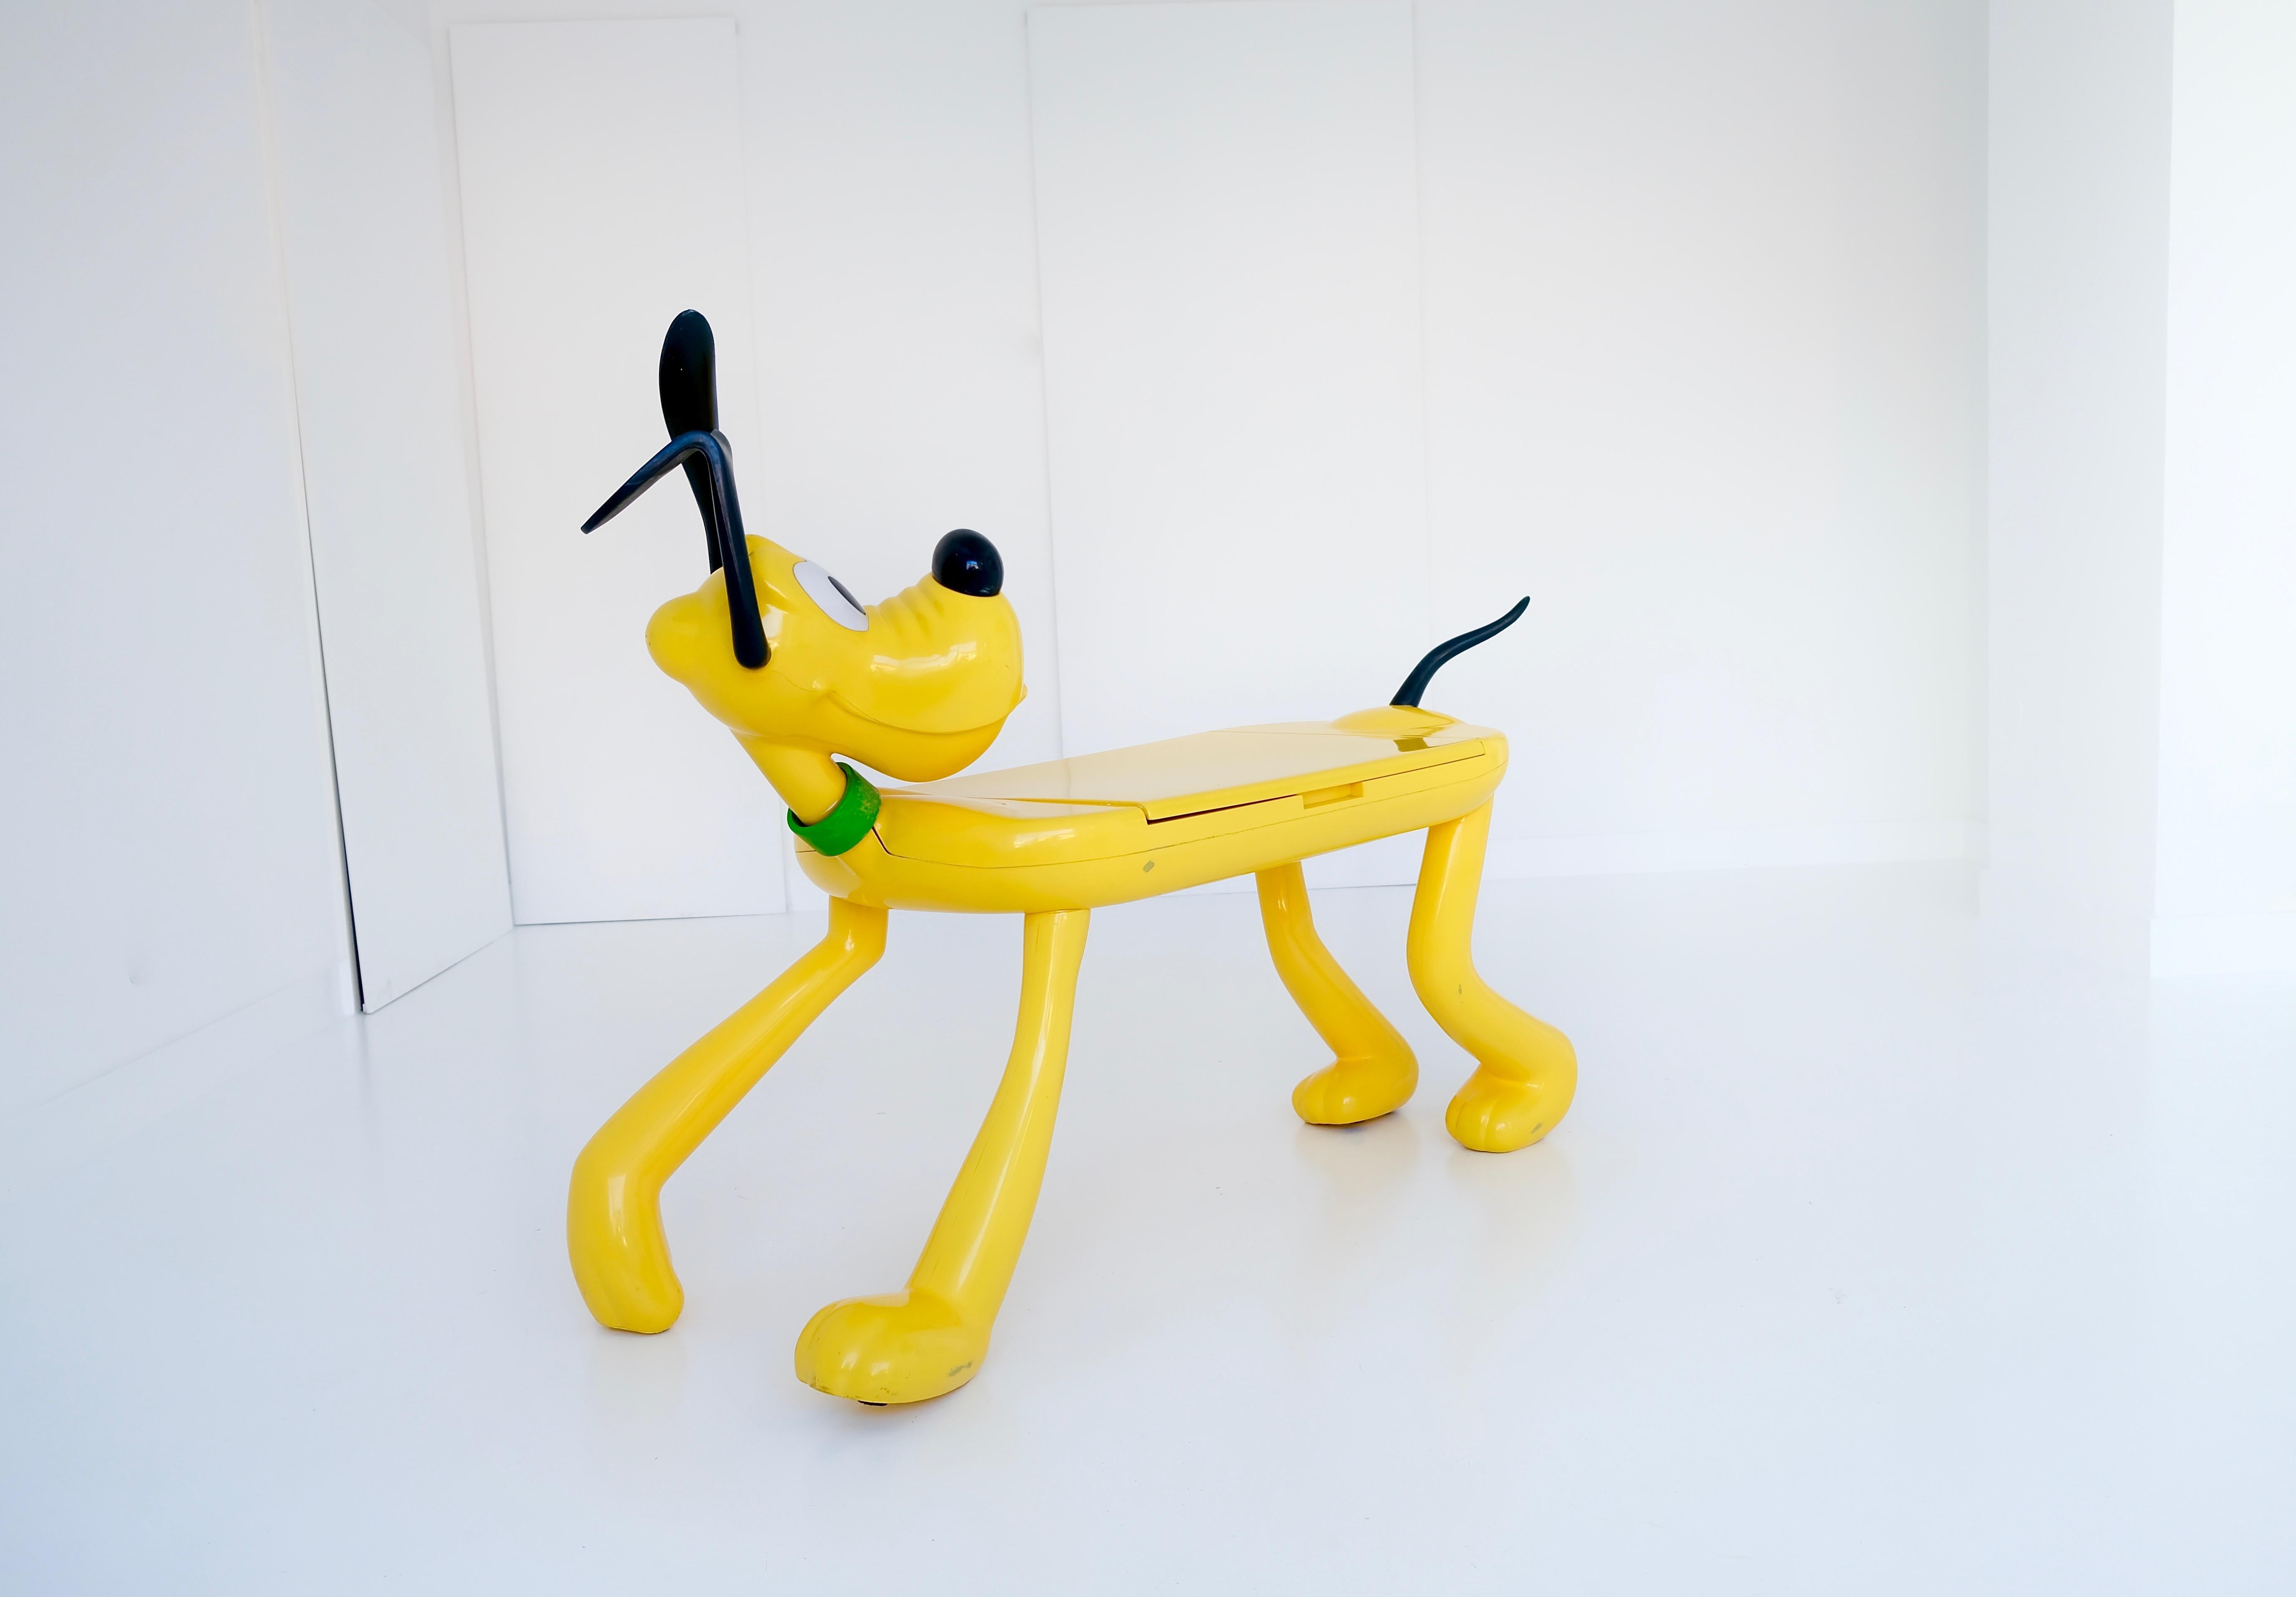 ‚Pluto‘ kids table / play desk, by Pierre Colleu for Disney, manufactured by Starform, France, 1980s, painted resin, laminated wood, plastic, rubber. Good original condition with minor wear, consistent with age and usage.

The ‚Pluto‘ table mimics